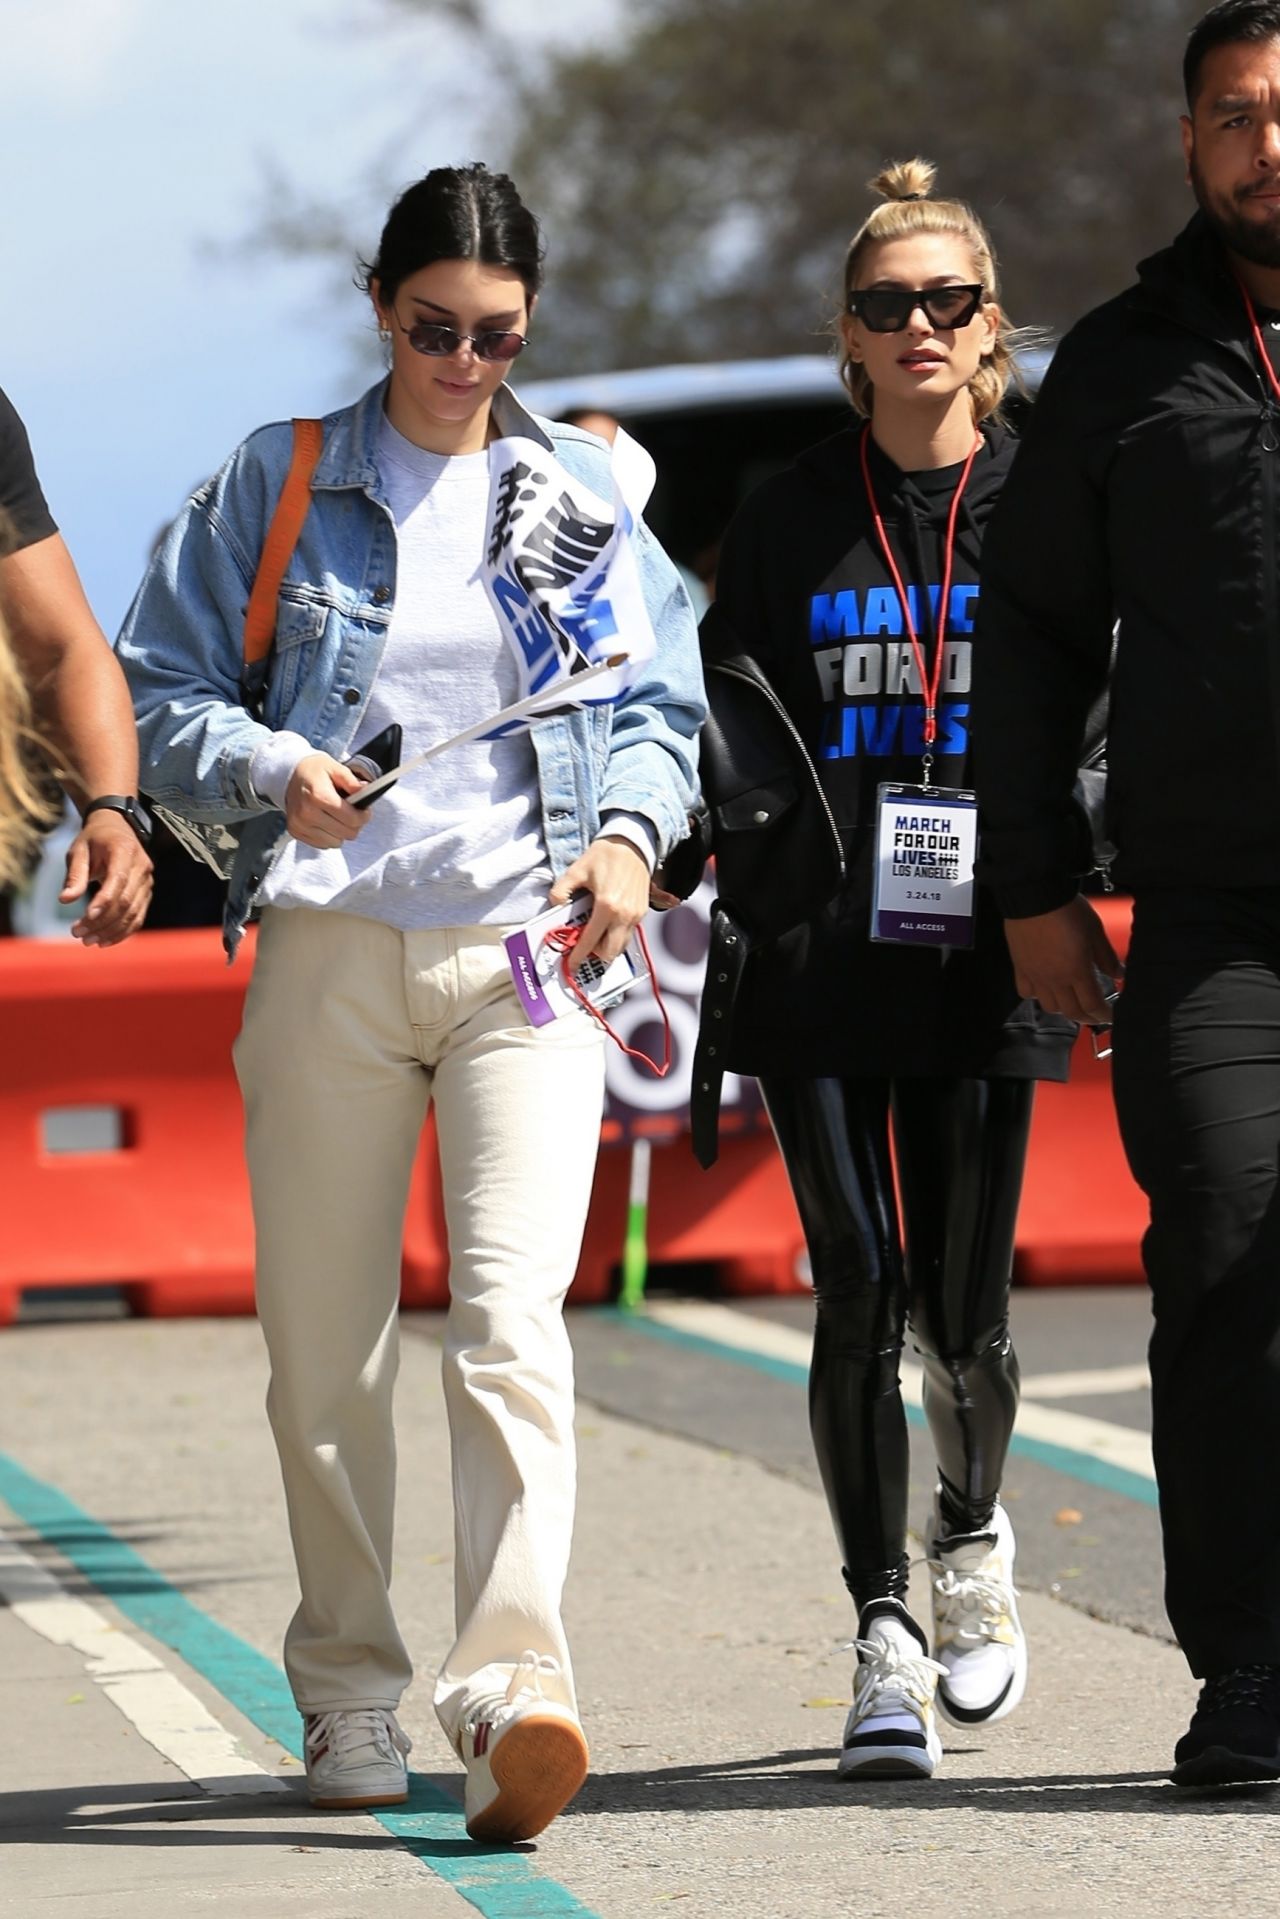 Hailey Baldwin March For Our Lives Los Angeles March 24, 2018 – Star Style